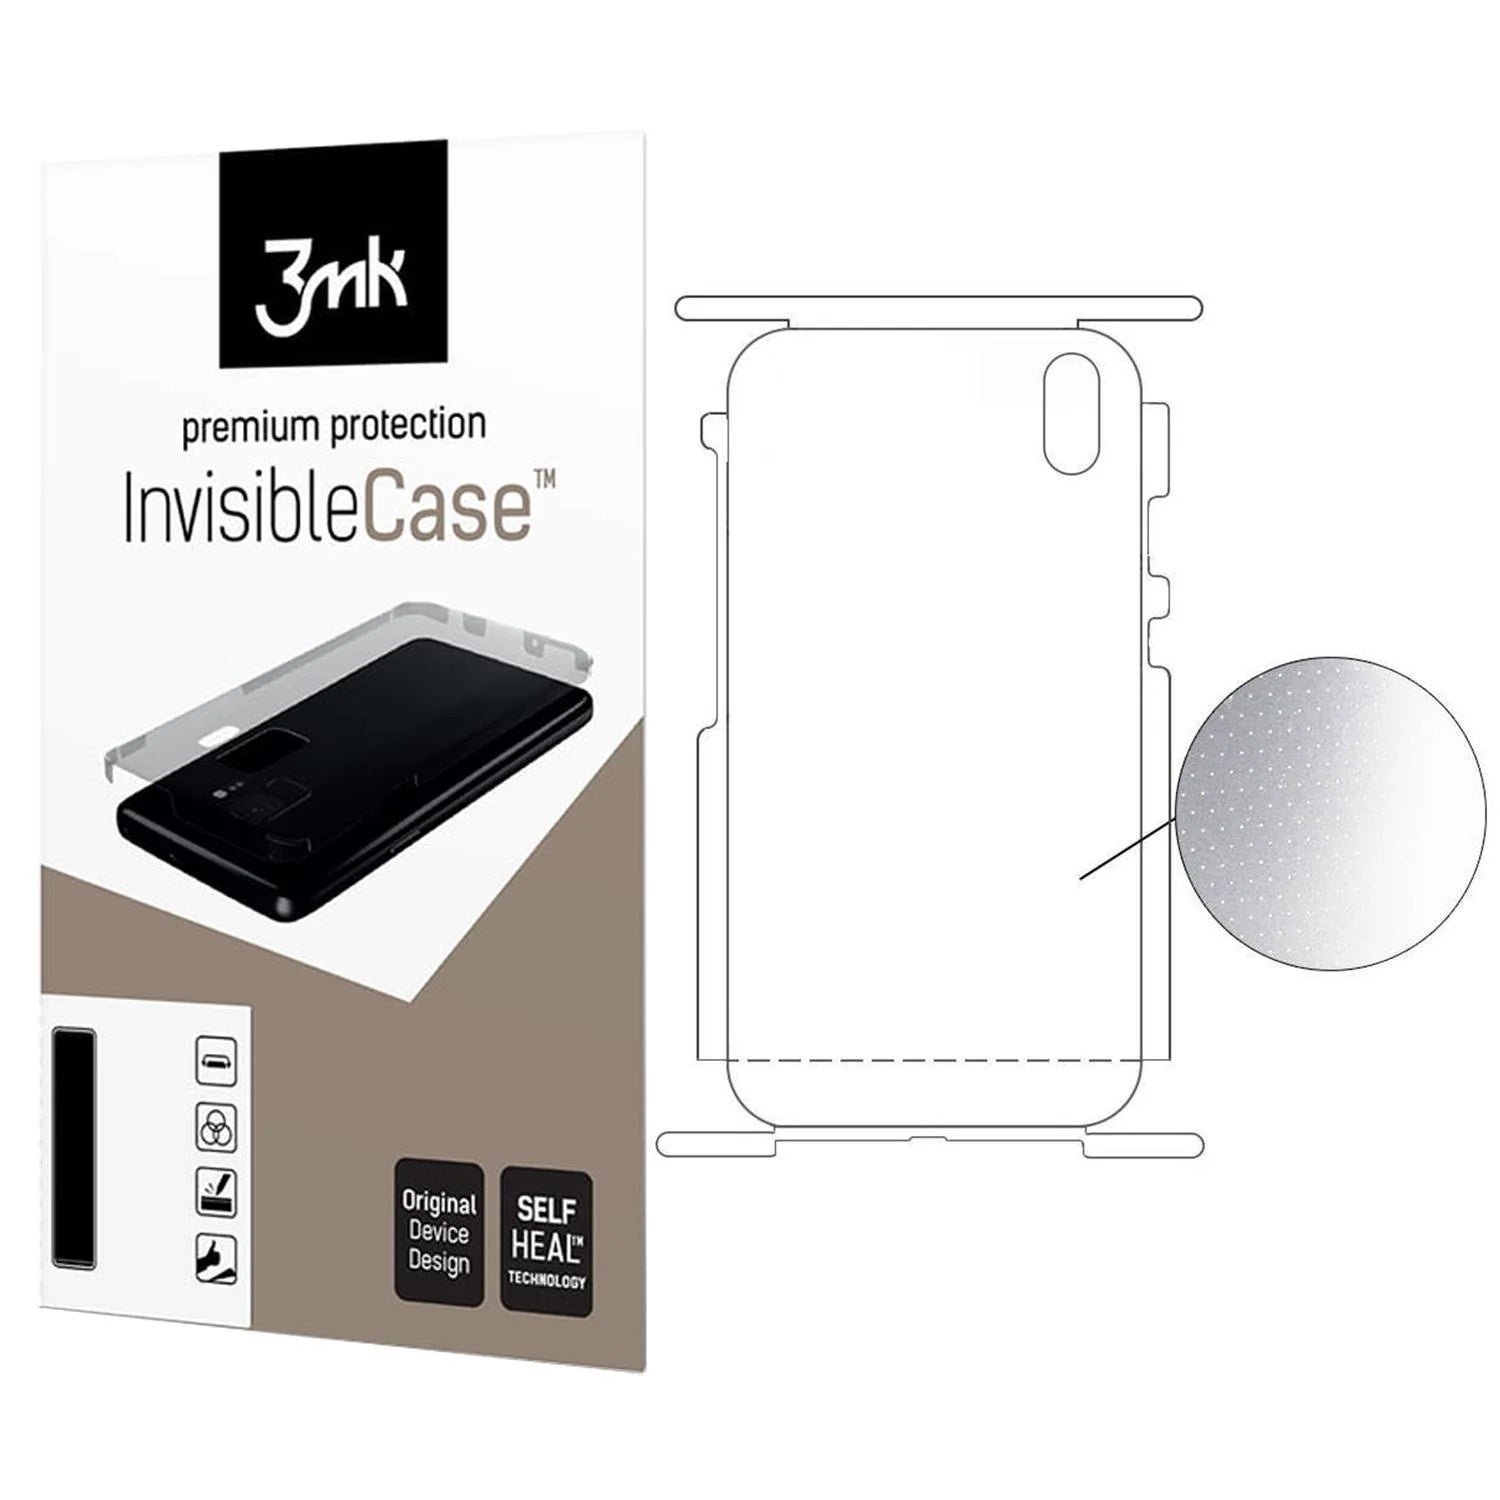 3mk Protective Film Case iPhone 8 Invisible High Grip